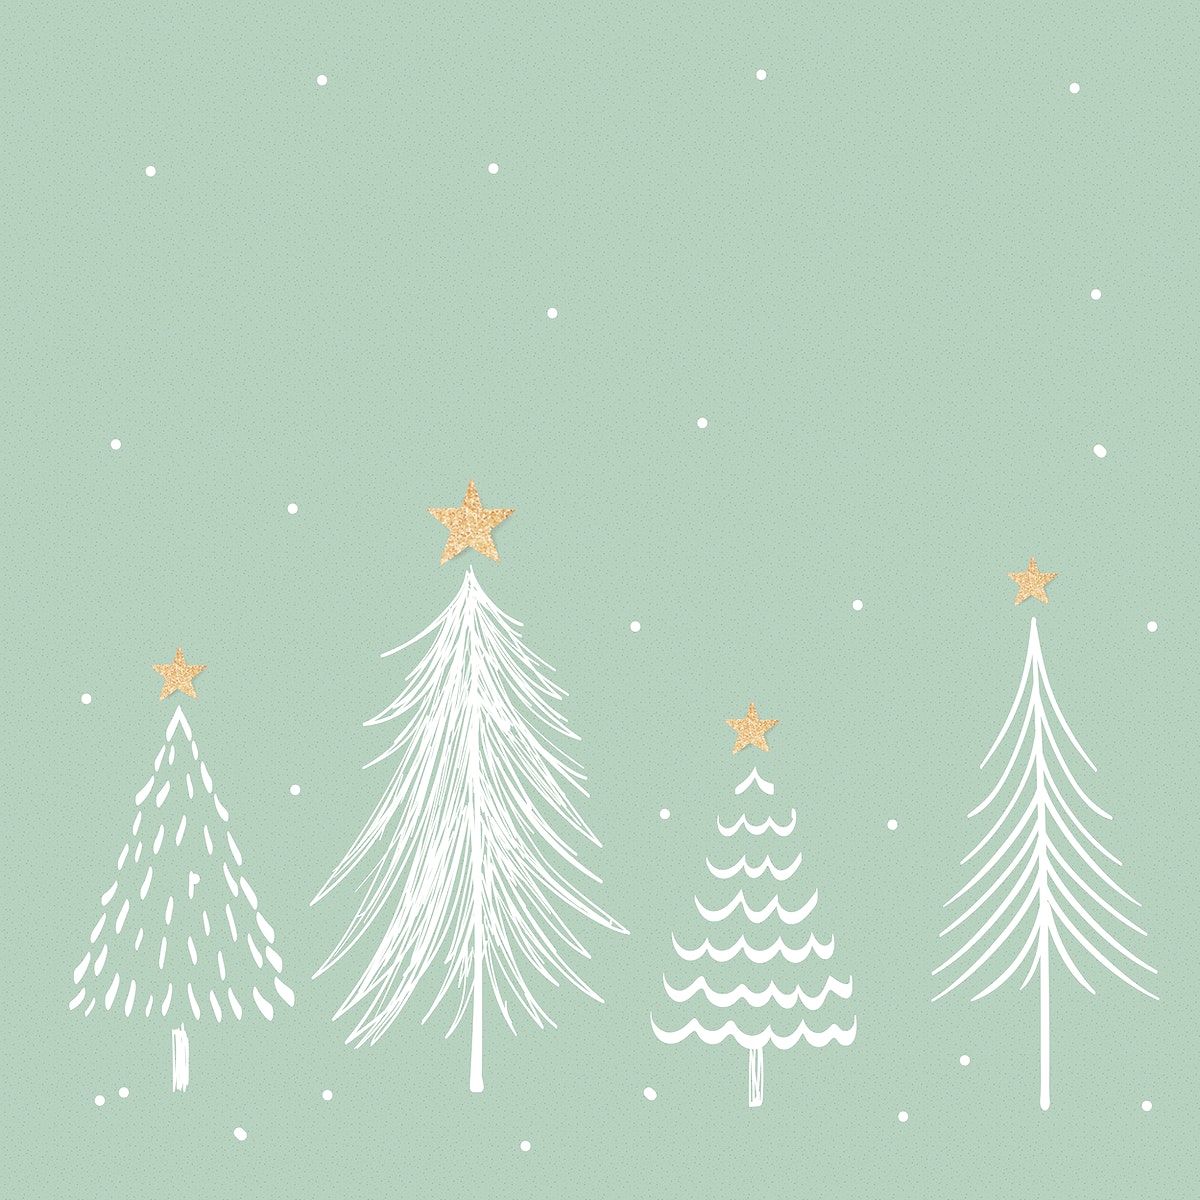 50 Aesthetic Christmas Wallpapers for iPhone Free Download  TechRushi